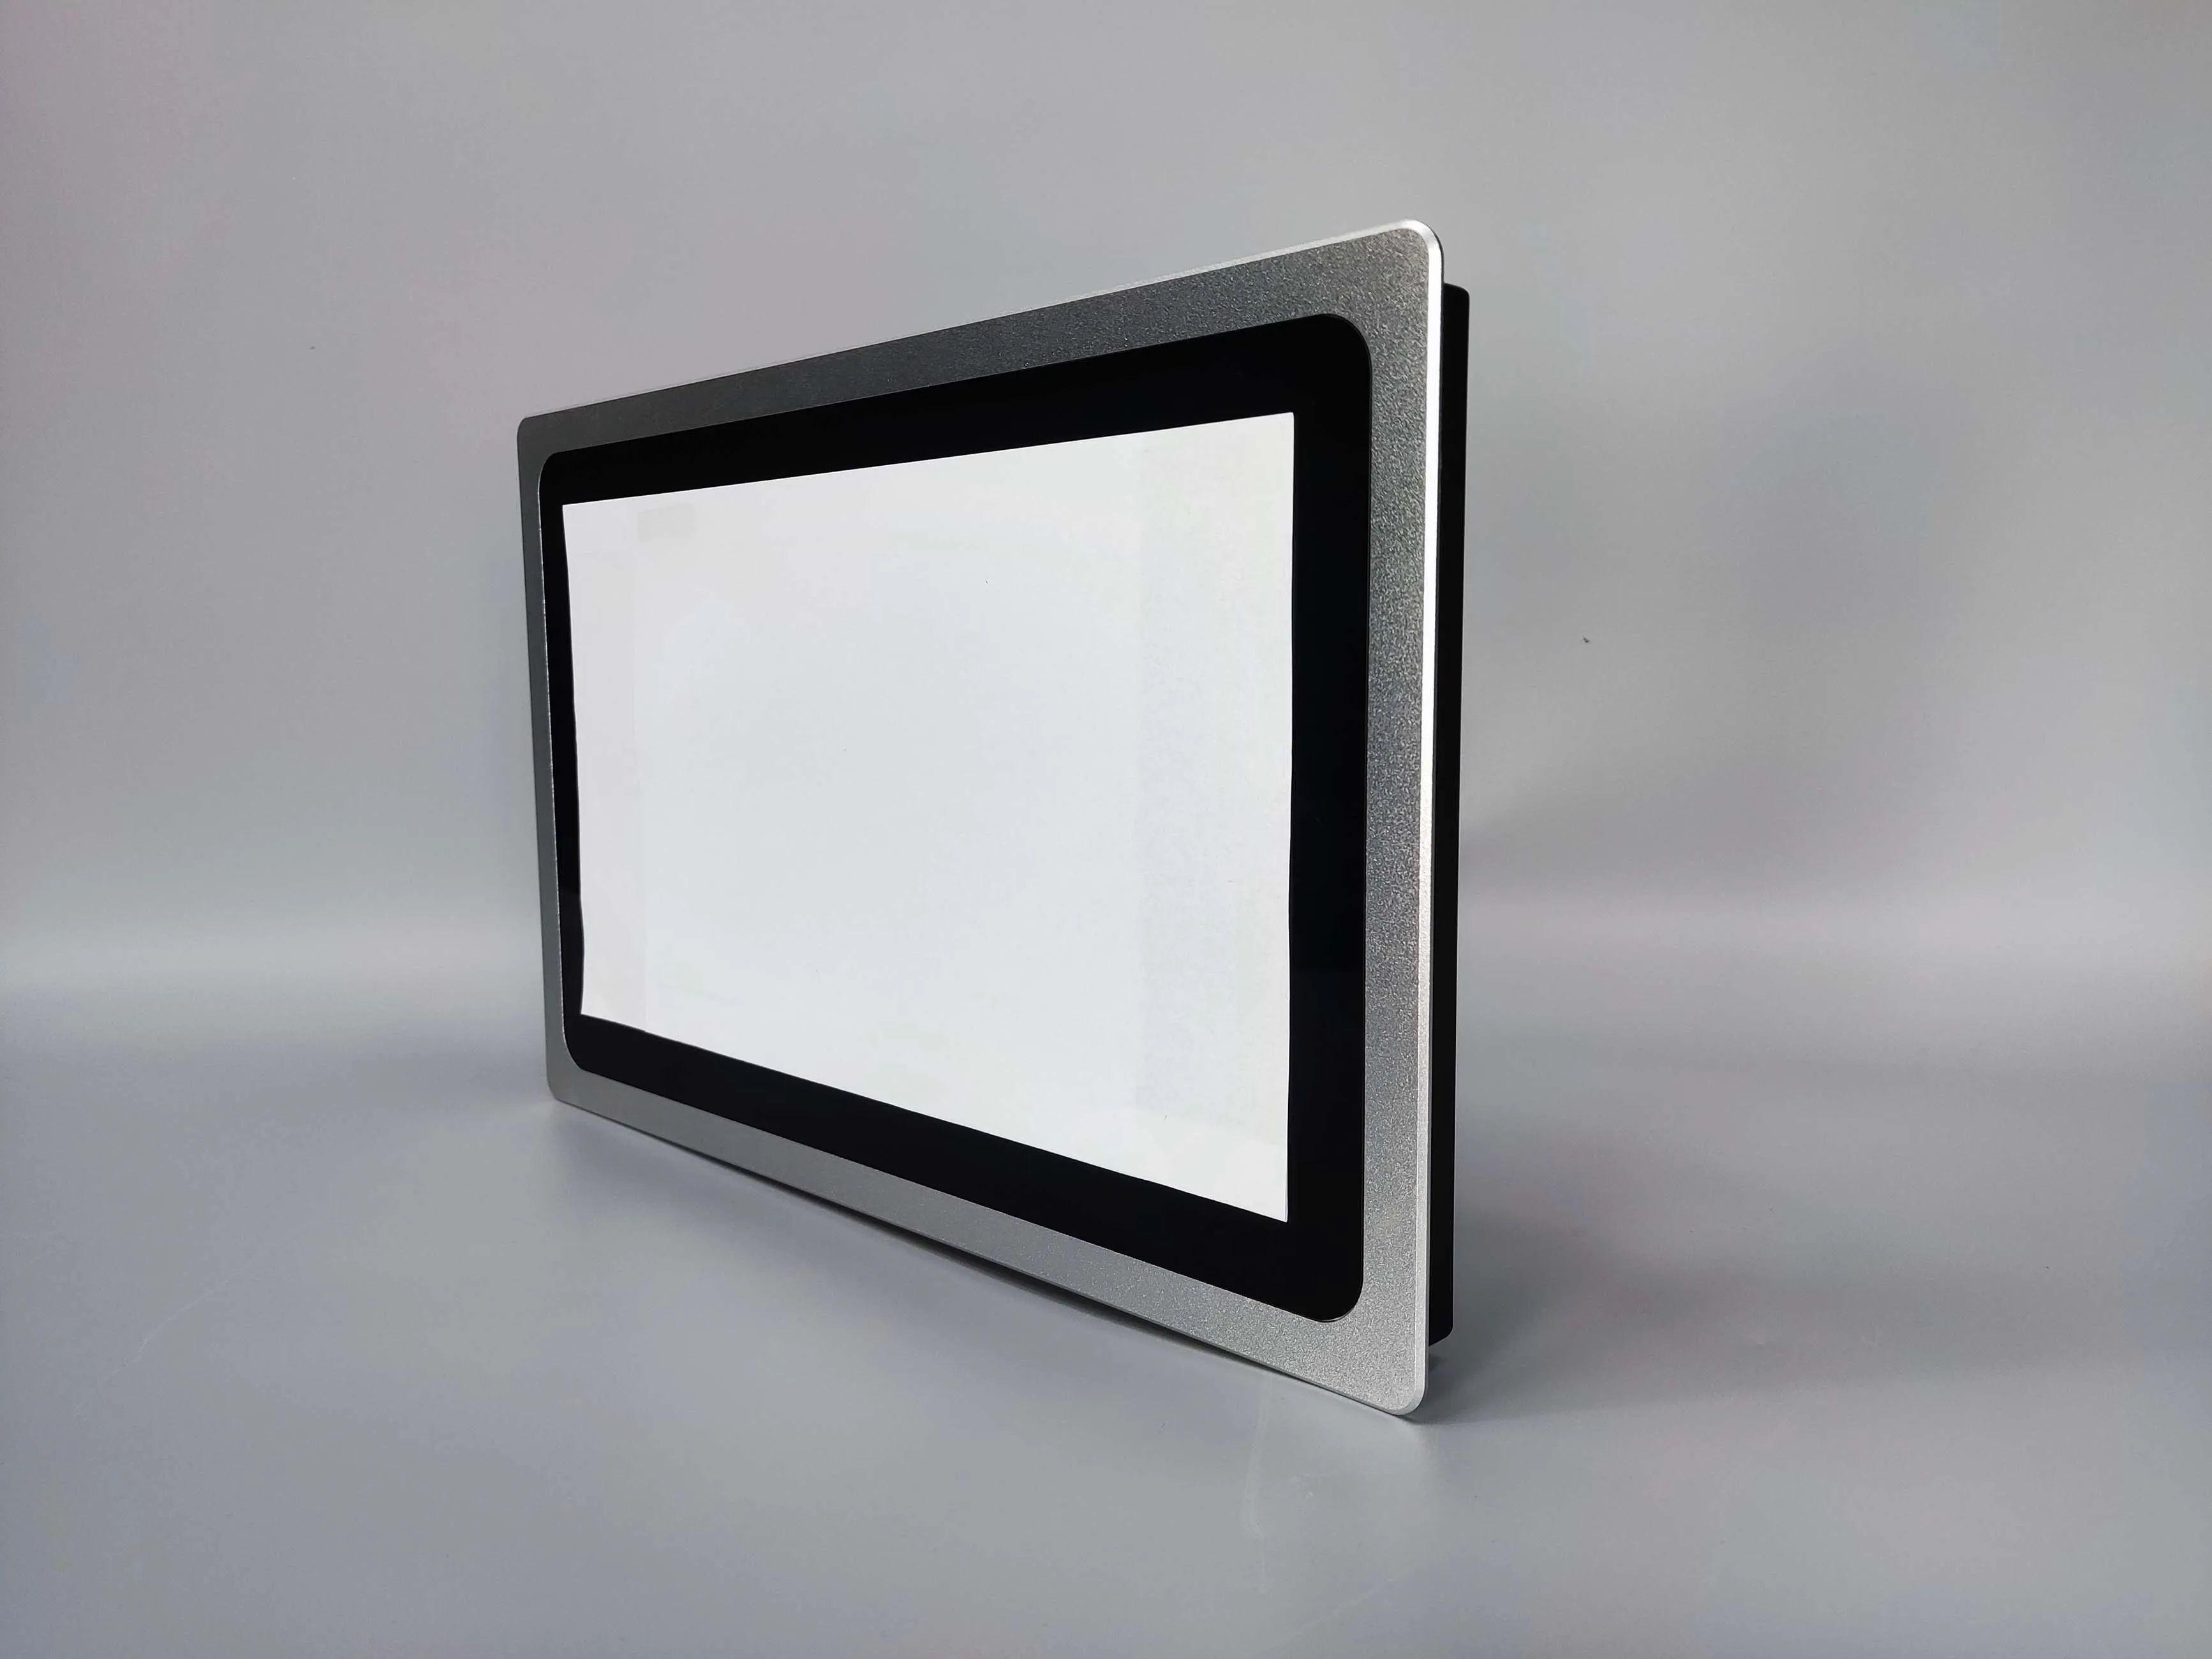 Embedded Wall Mounted Open Frame Industry All In One Computer Capacitive Resistive Touch Screen Ip65 Industrial Panel Pc